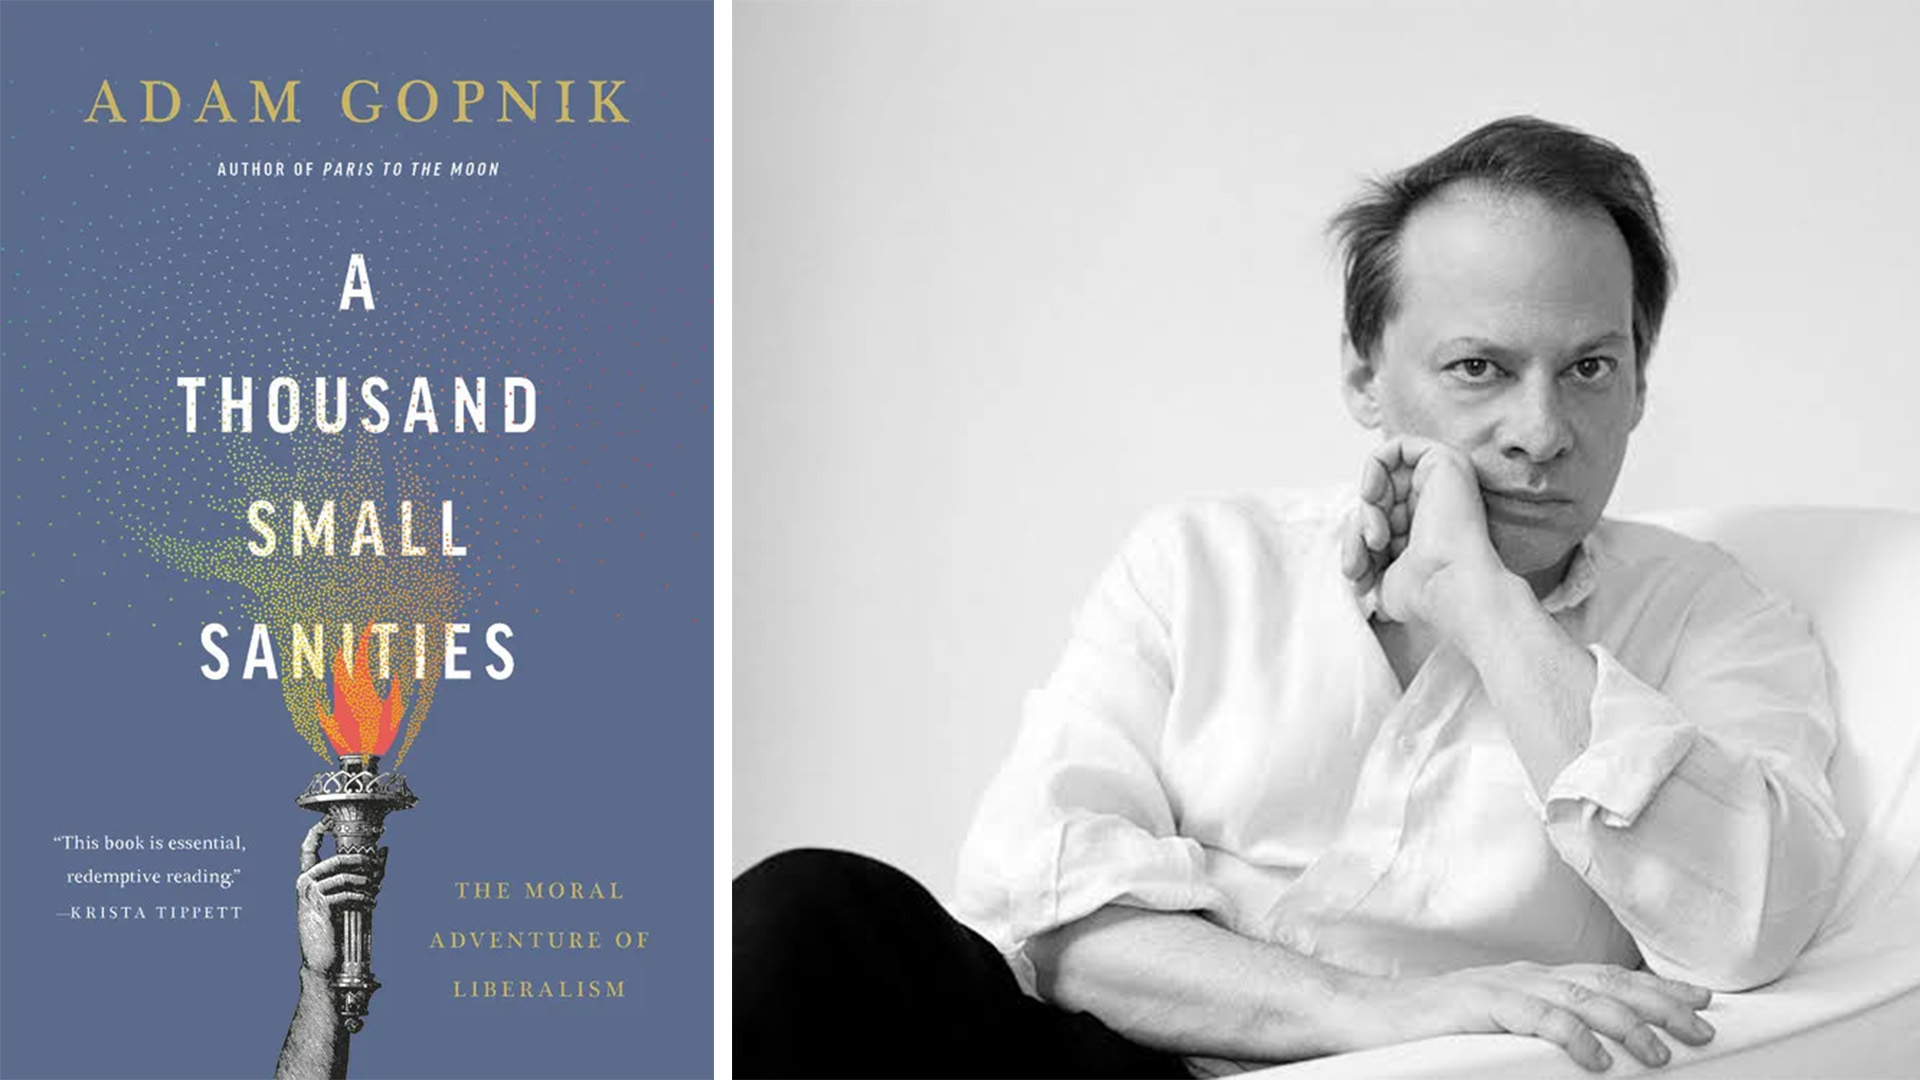 two photos side of side: on the left, the cover of the book, A Thousand Small Sanities; and on the right, a portrait of Adam Gopnik.